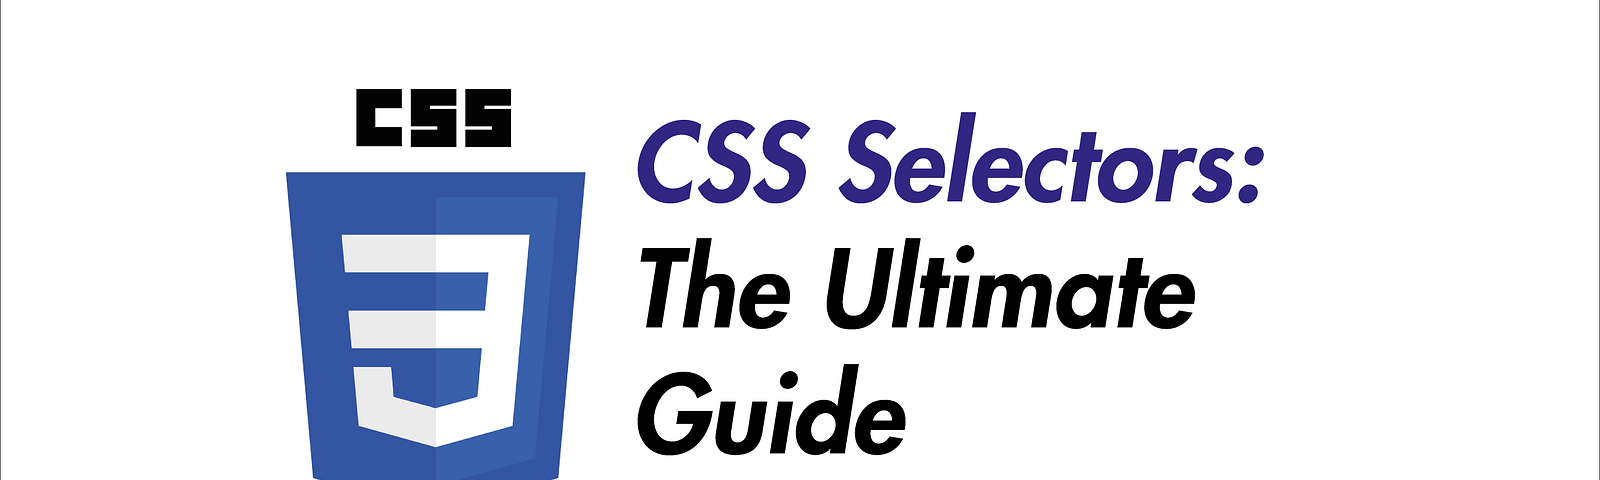 CSS Selectors, the ultimate guide with examples